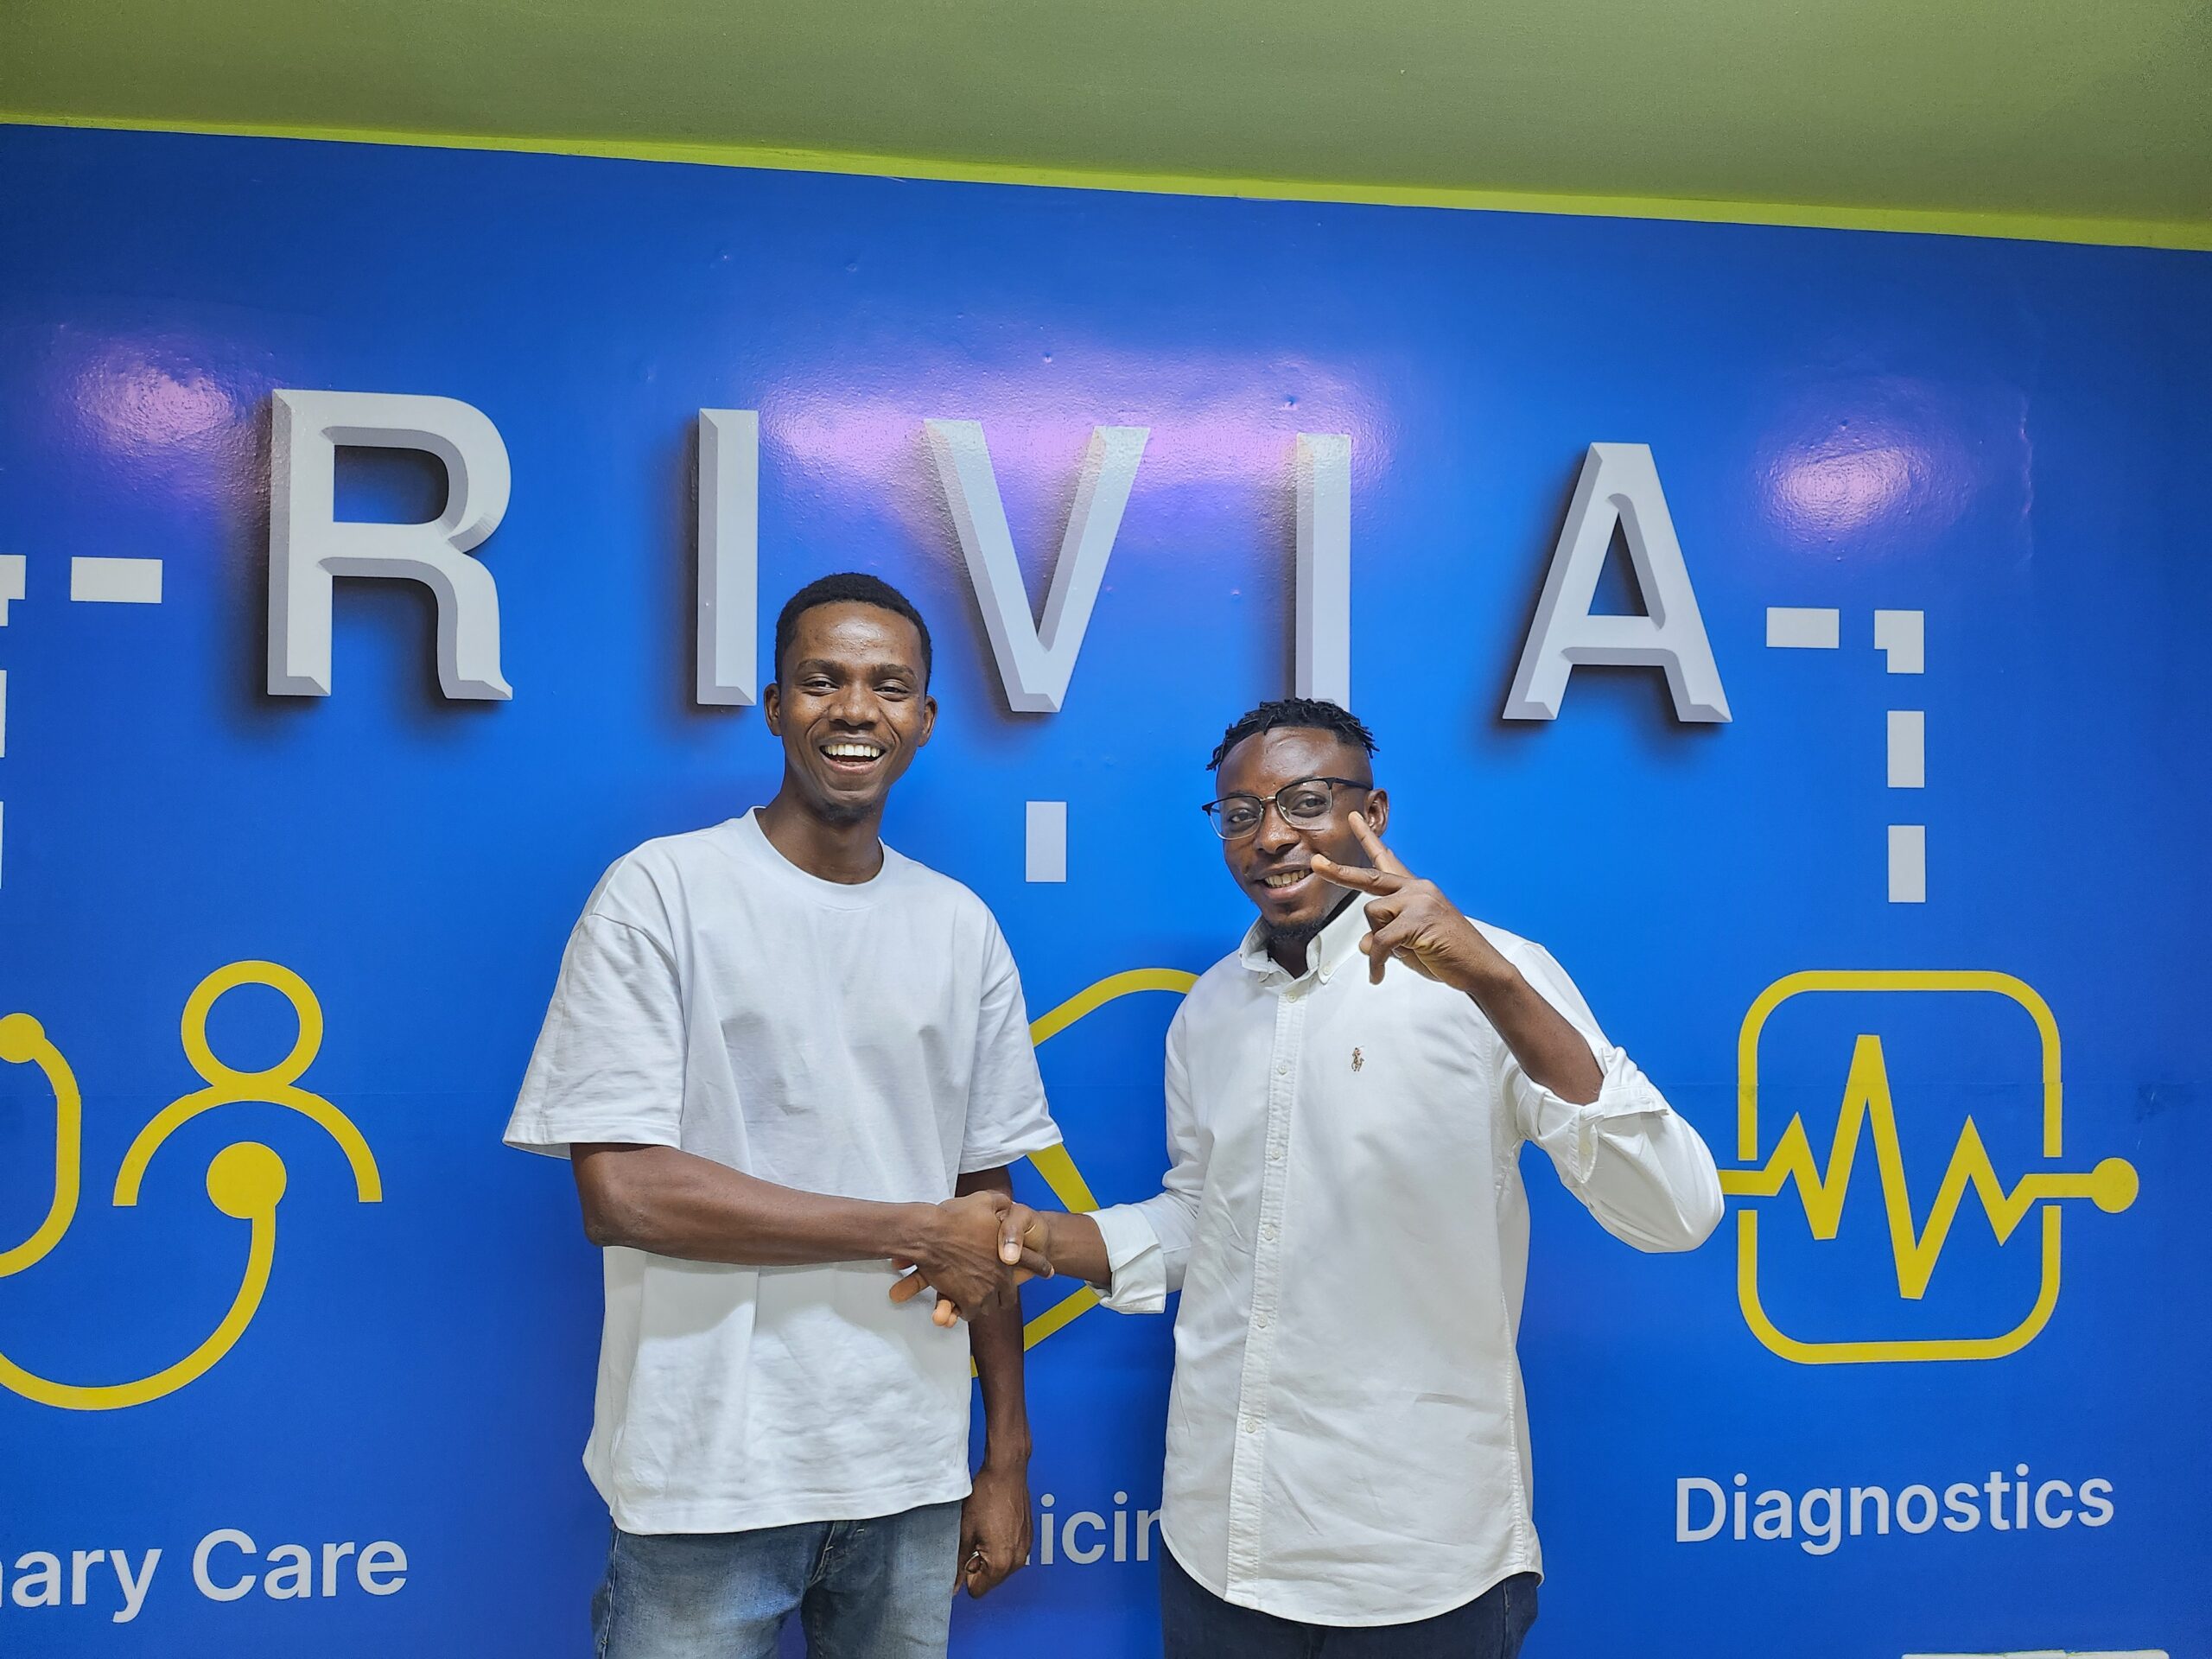 From left to right: Waffle founder Victor Nara and Rivia CEO Isidore Kpotufe,